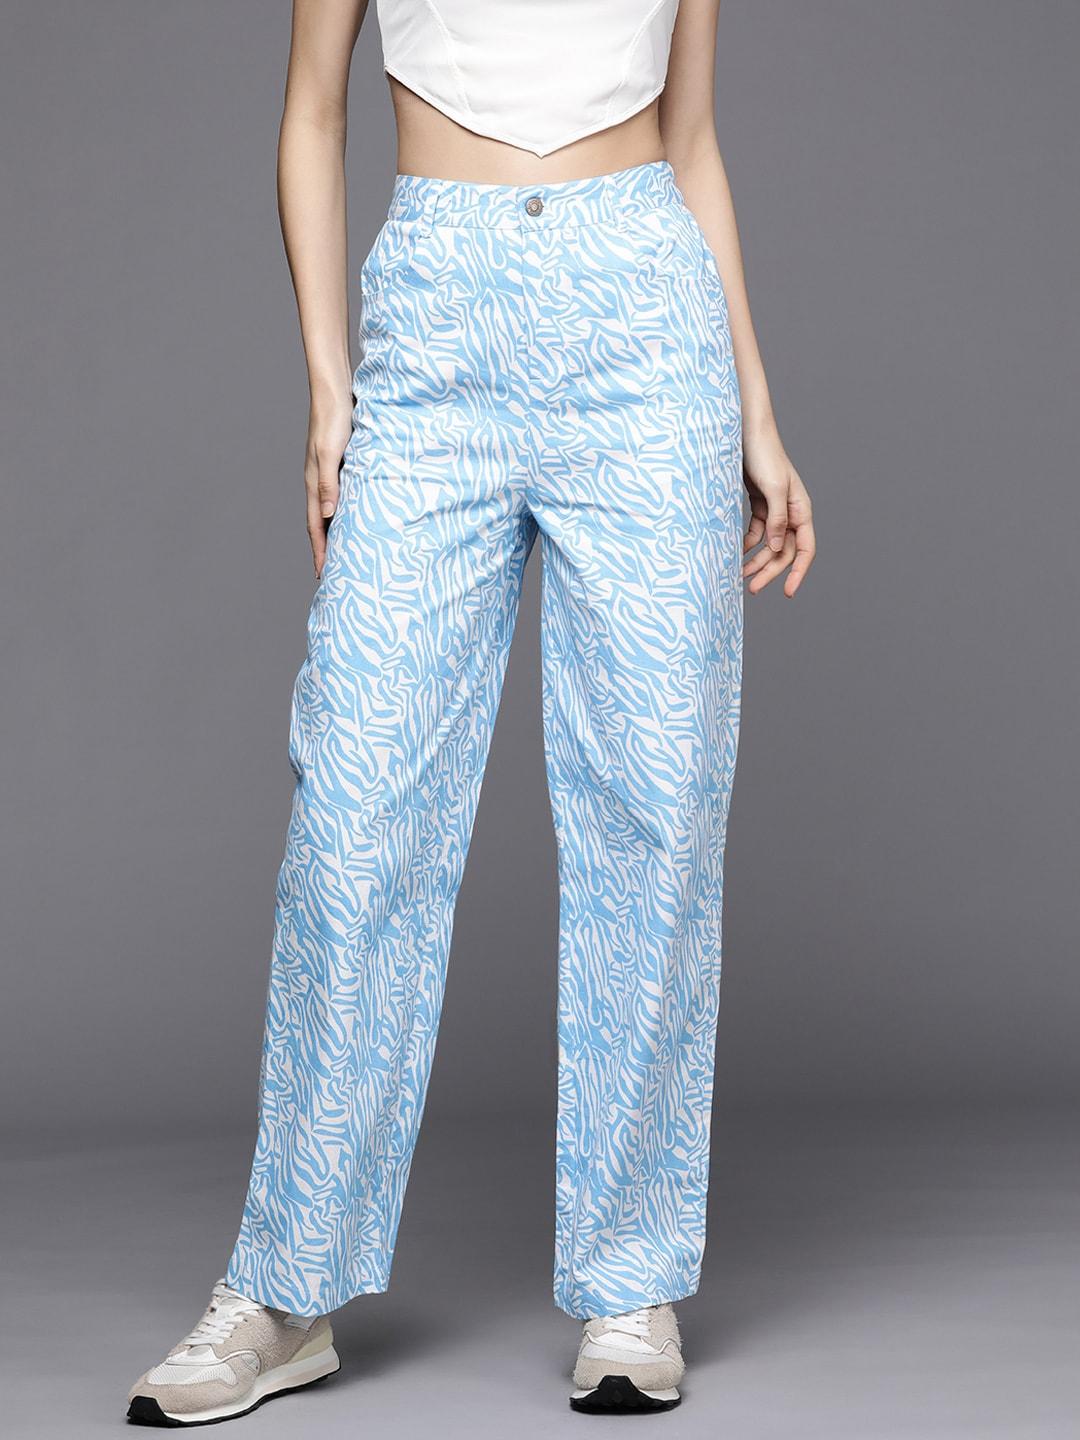 sassafras-women-turquoise-blue-printed-cotton-high-rise-trousers